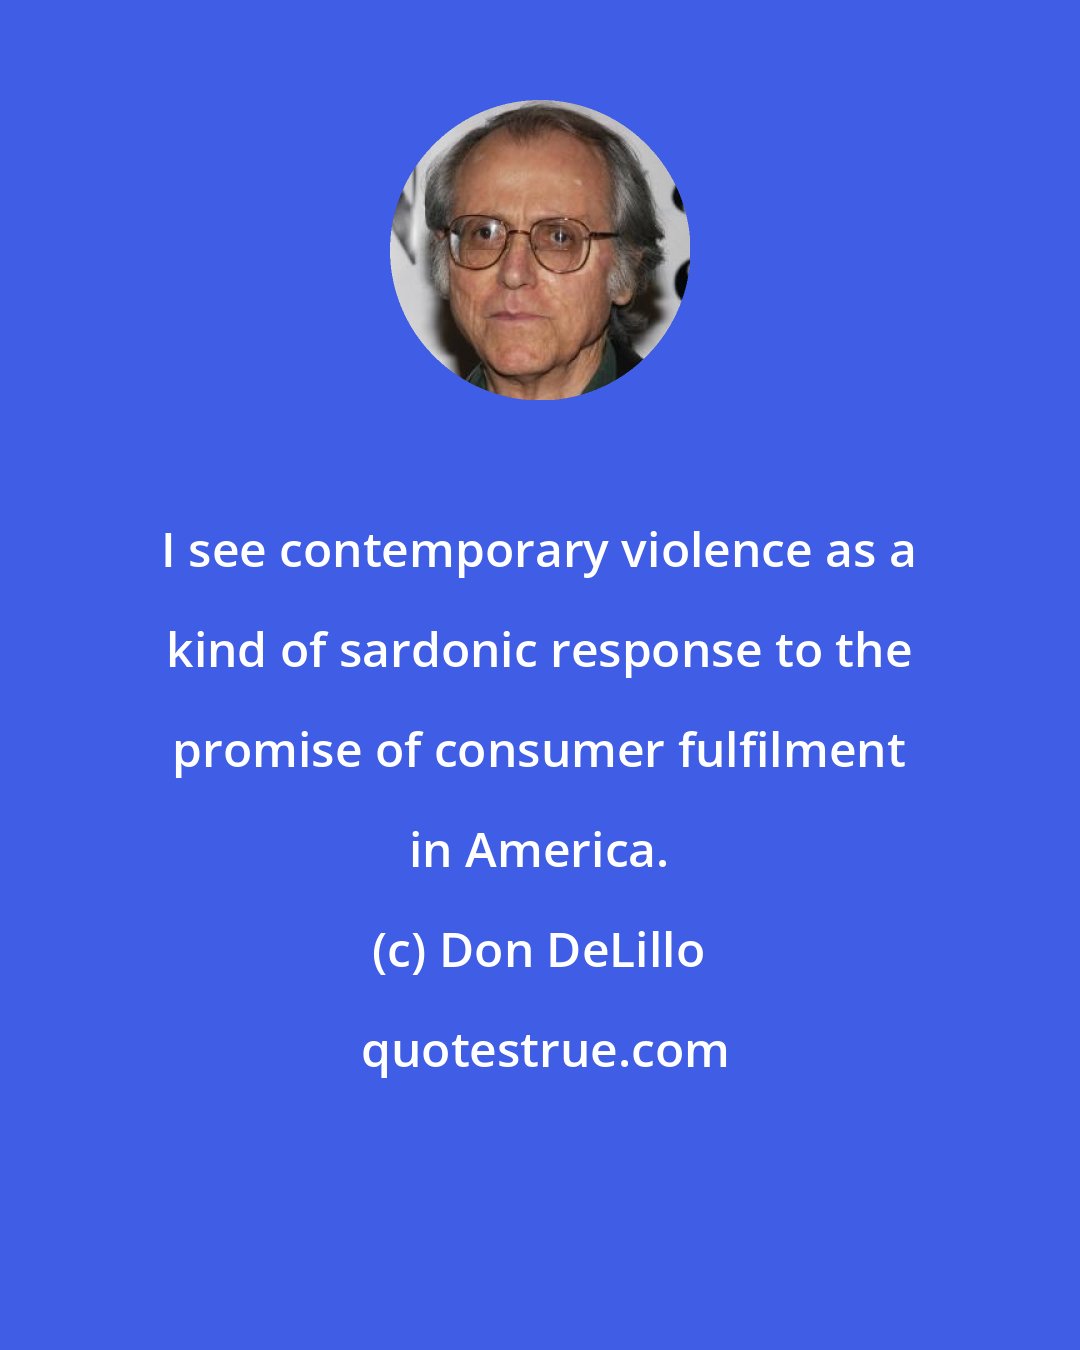 Don DeLillo: I see contemporary violence as a kind of sardonic response to the promise of consumer fulfilment in America.